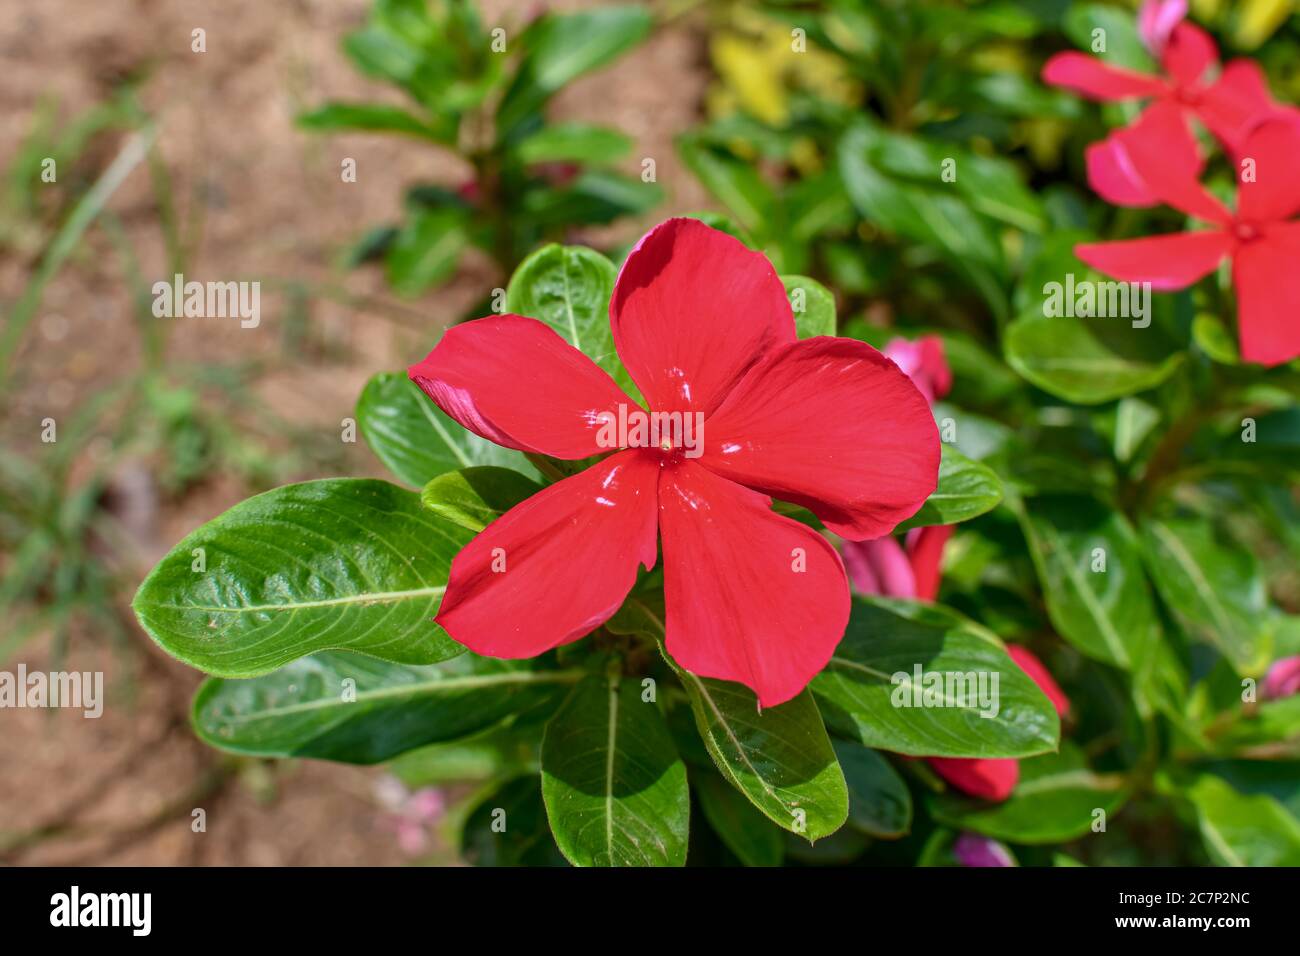 Red Tecoma Flowers With Green Leaves & Branches On Tree.  05 Stock Photo